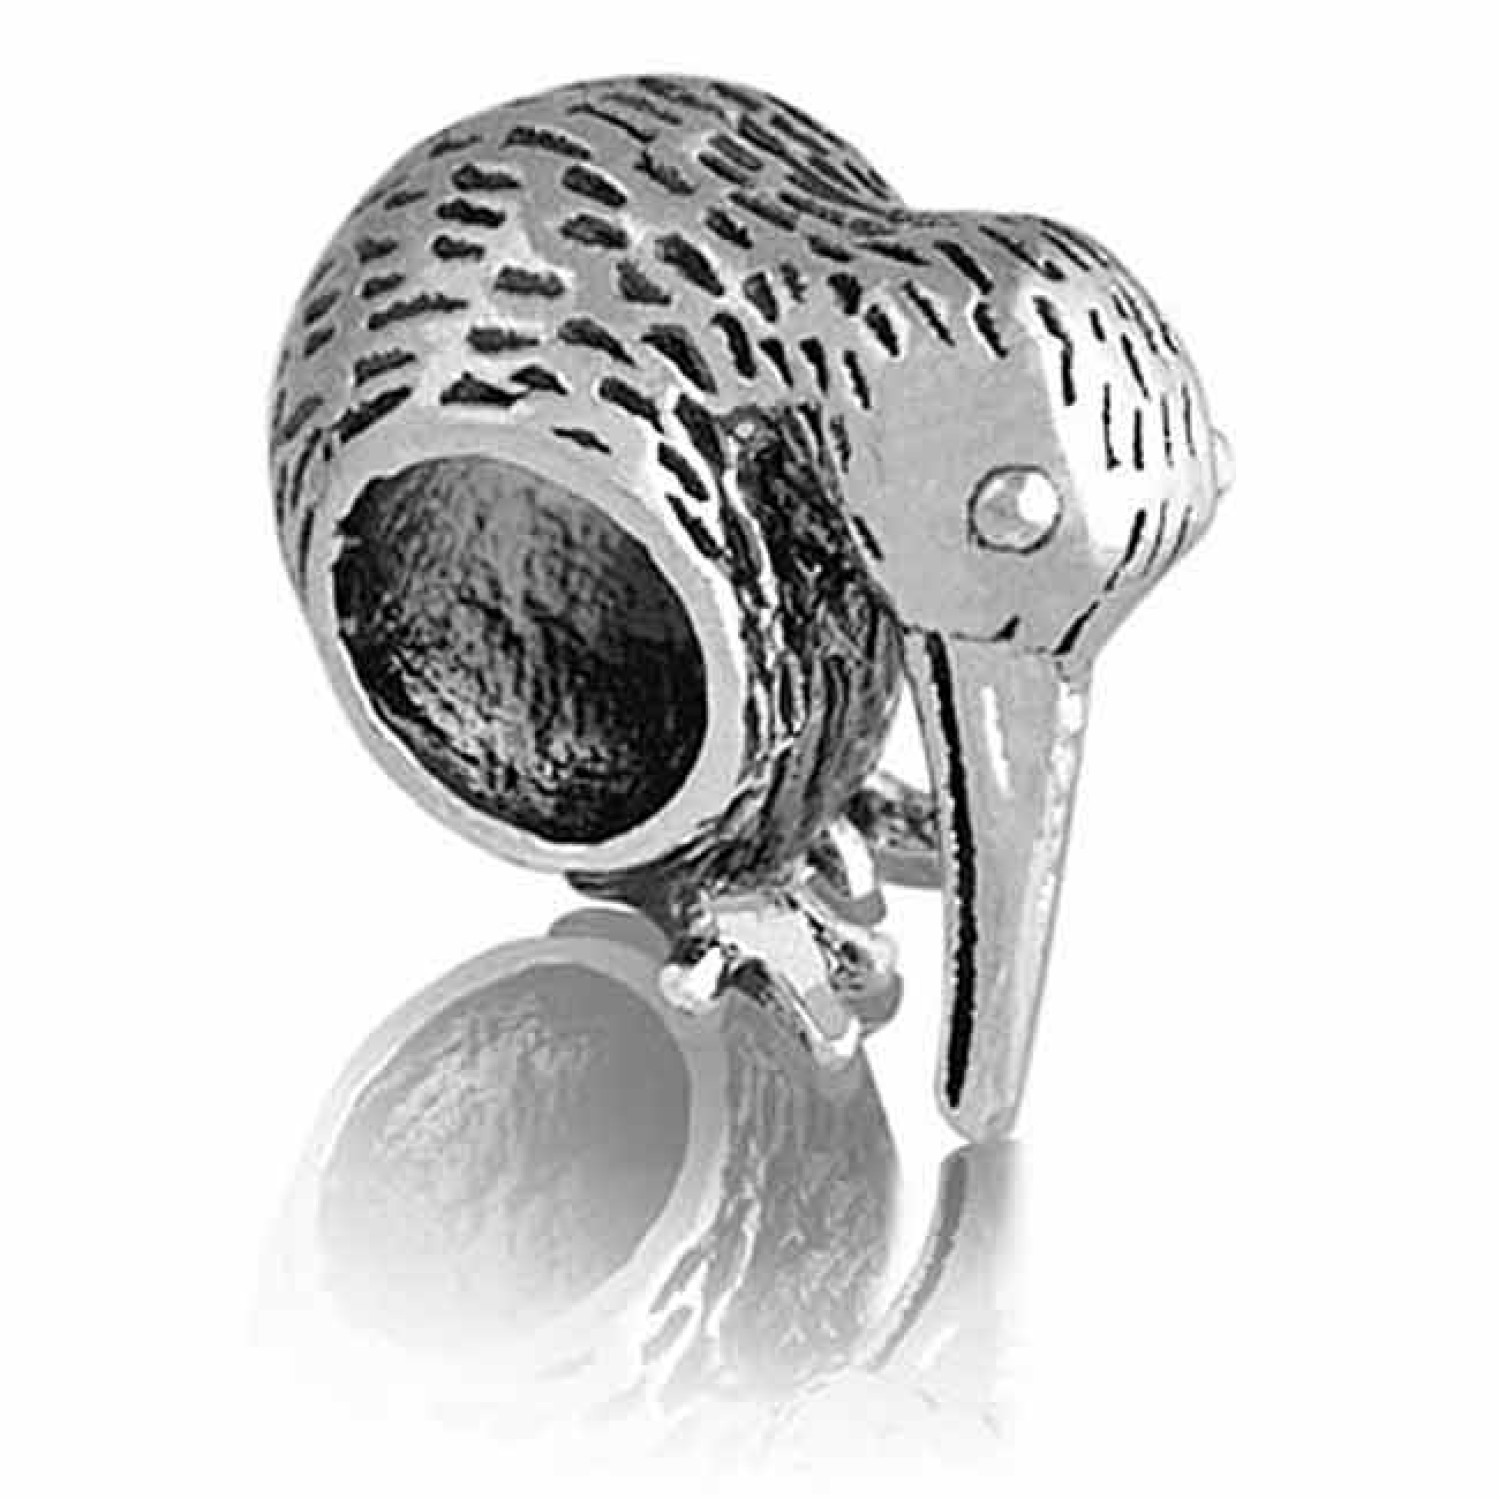 LK018 Evolve Baby Kiwi  Proud to be a Kiwi. The kiwi is a much loved and famously endangered New Zealand bird. It is also the name we fondly give to ourselves and the name which other countries affectionately know us by. The kiwi is a treasured national i